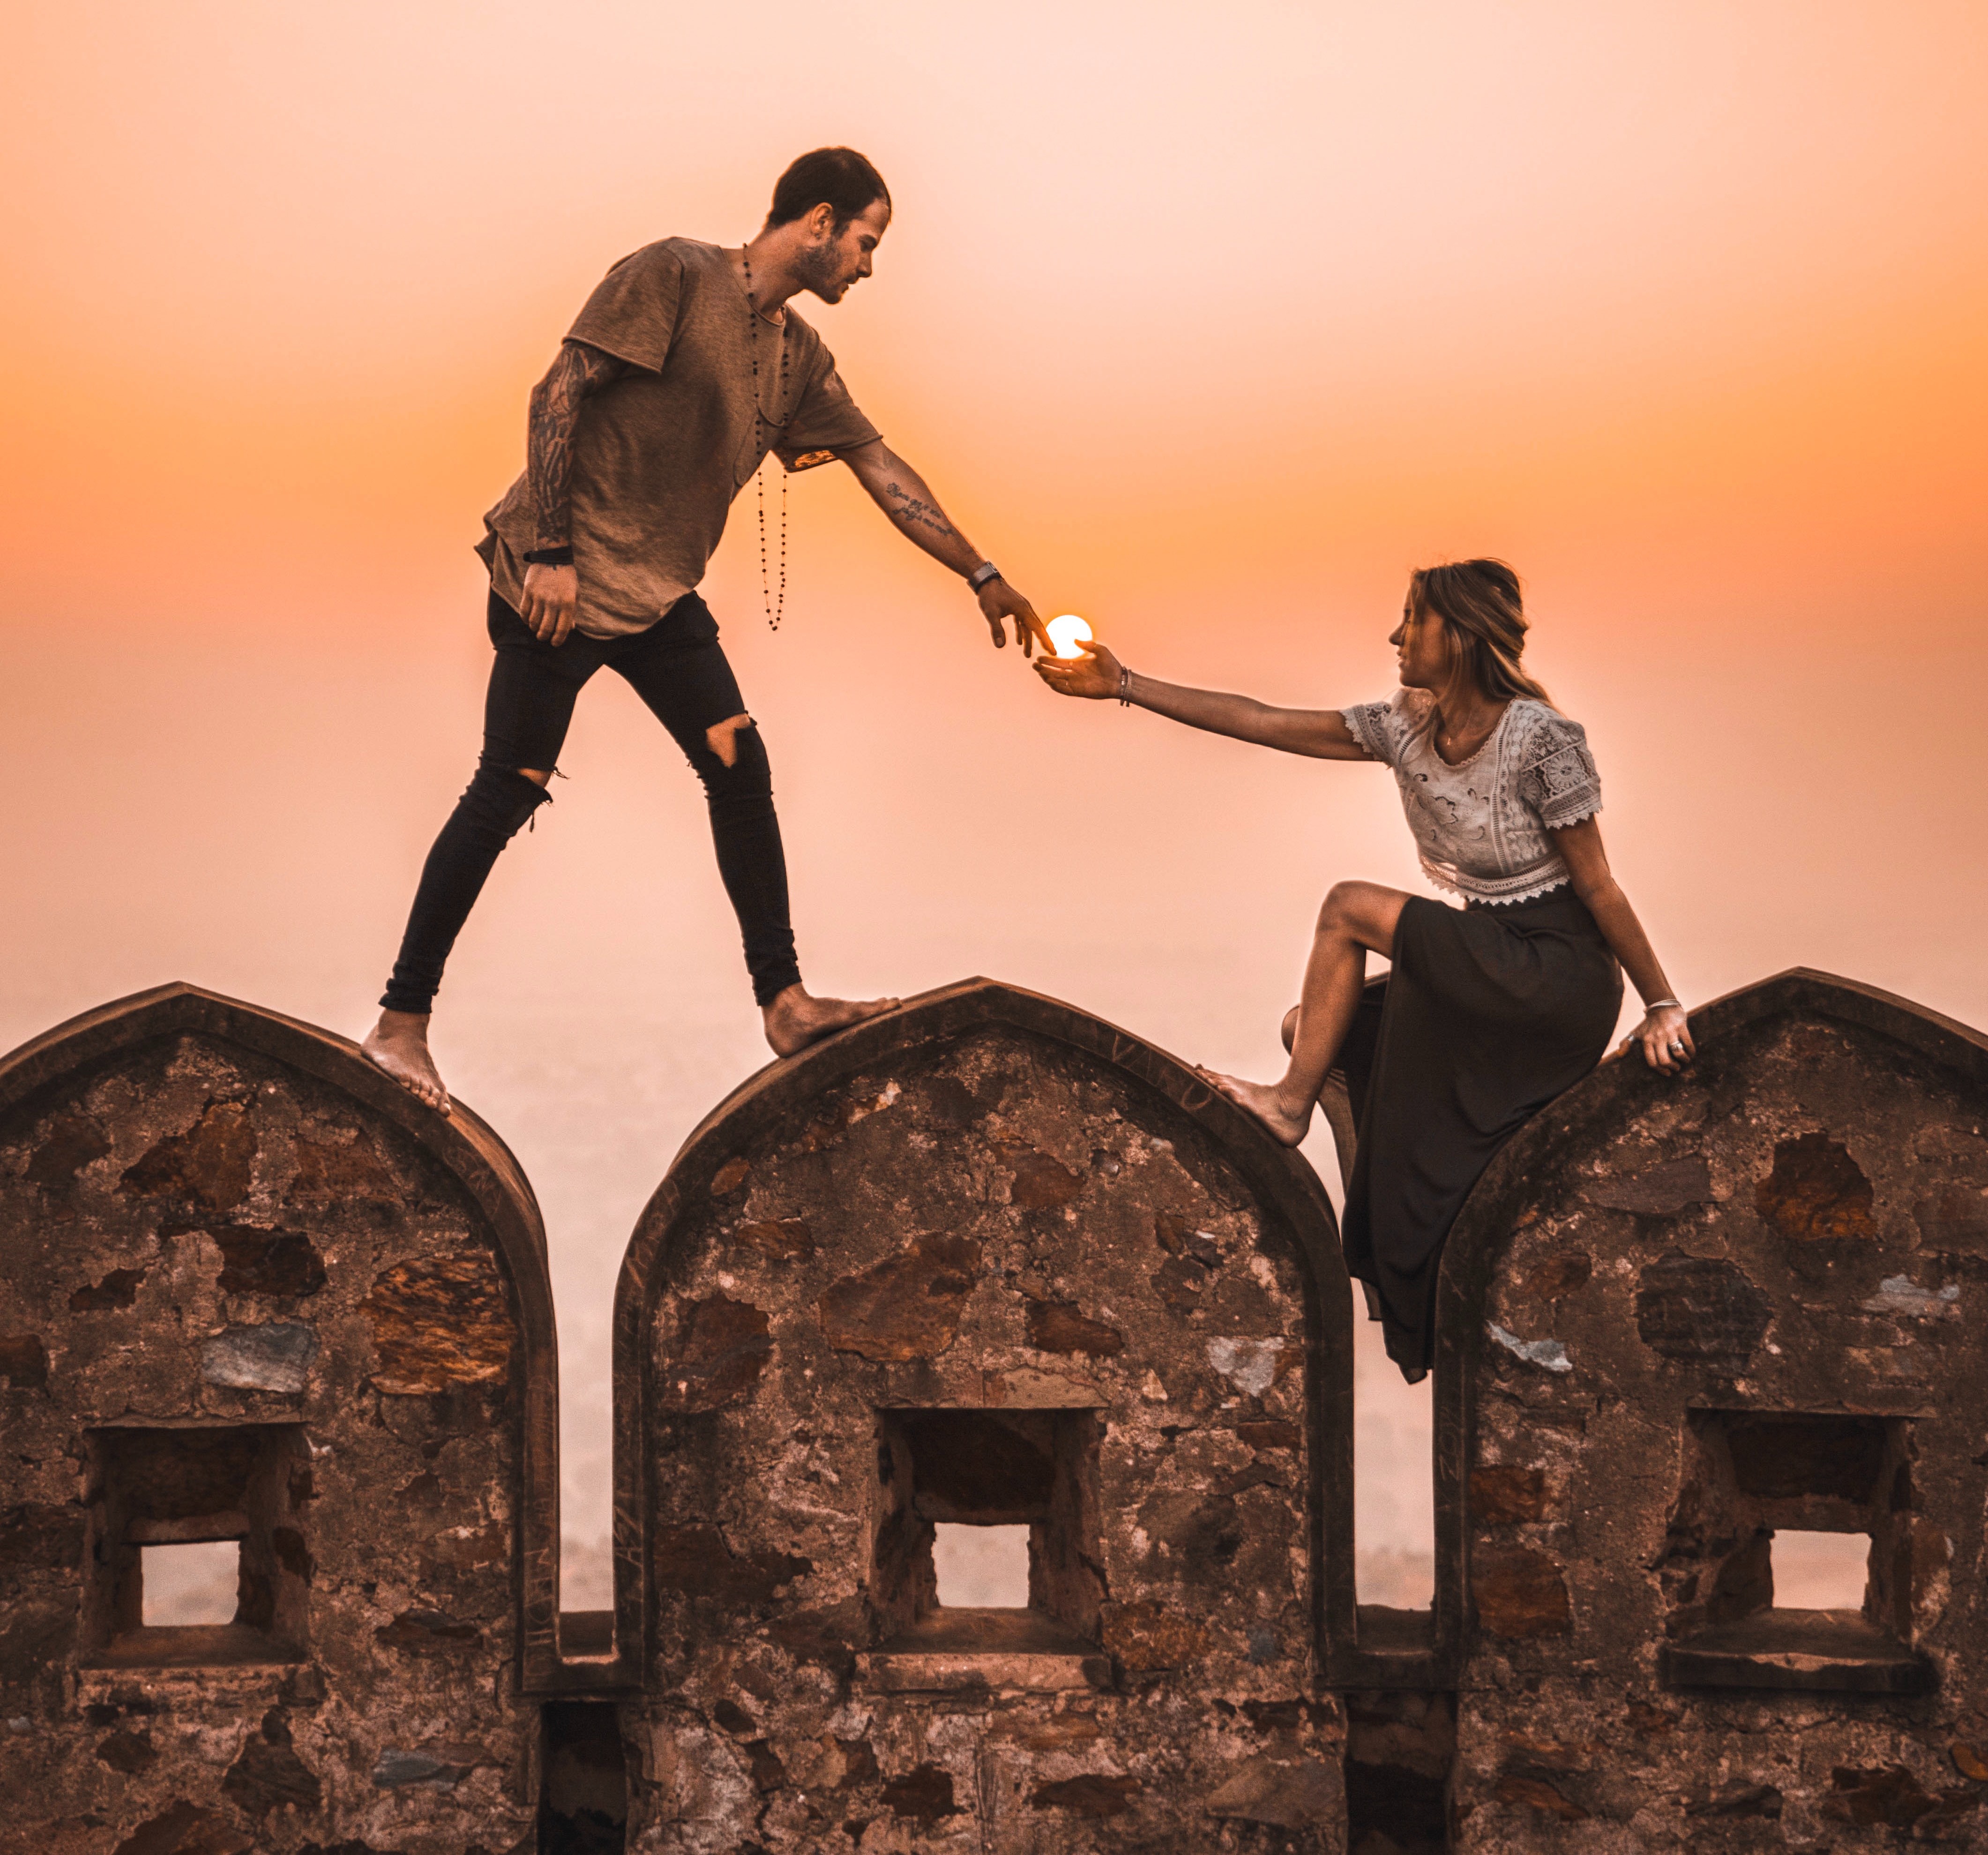 Image of a young man and woman climbing on a structure on a date